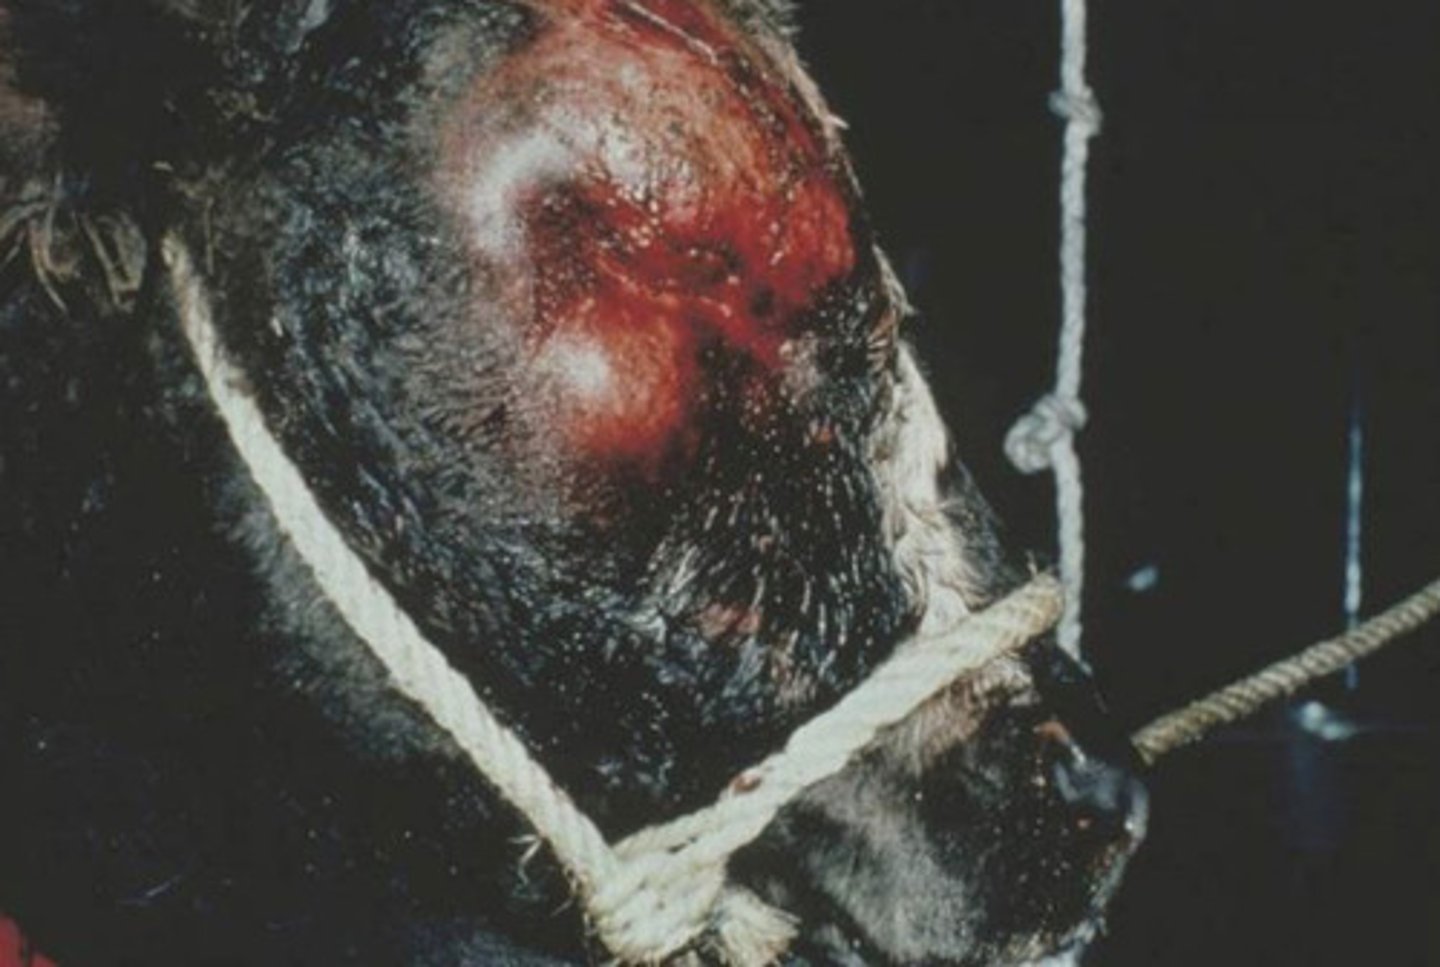 <p>-clinical presentation similar to rabies </p><p>-acquired through contact with pigs but this virus is now eradicated from domestic pigs in the USA</p><p>-<strong>clinical signs</strong>: self-mutilation // bellowing // look like they're choking // aggression </p><p>-no virus excretion at site of self mutilation (hence no transmission)</p><p>-virus can be isolated from the brain</p><p>-<span class="bgP">don't typically vaccinate cattle against this virus</span> </p>